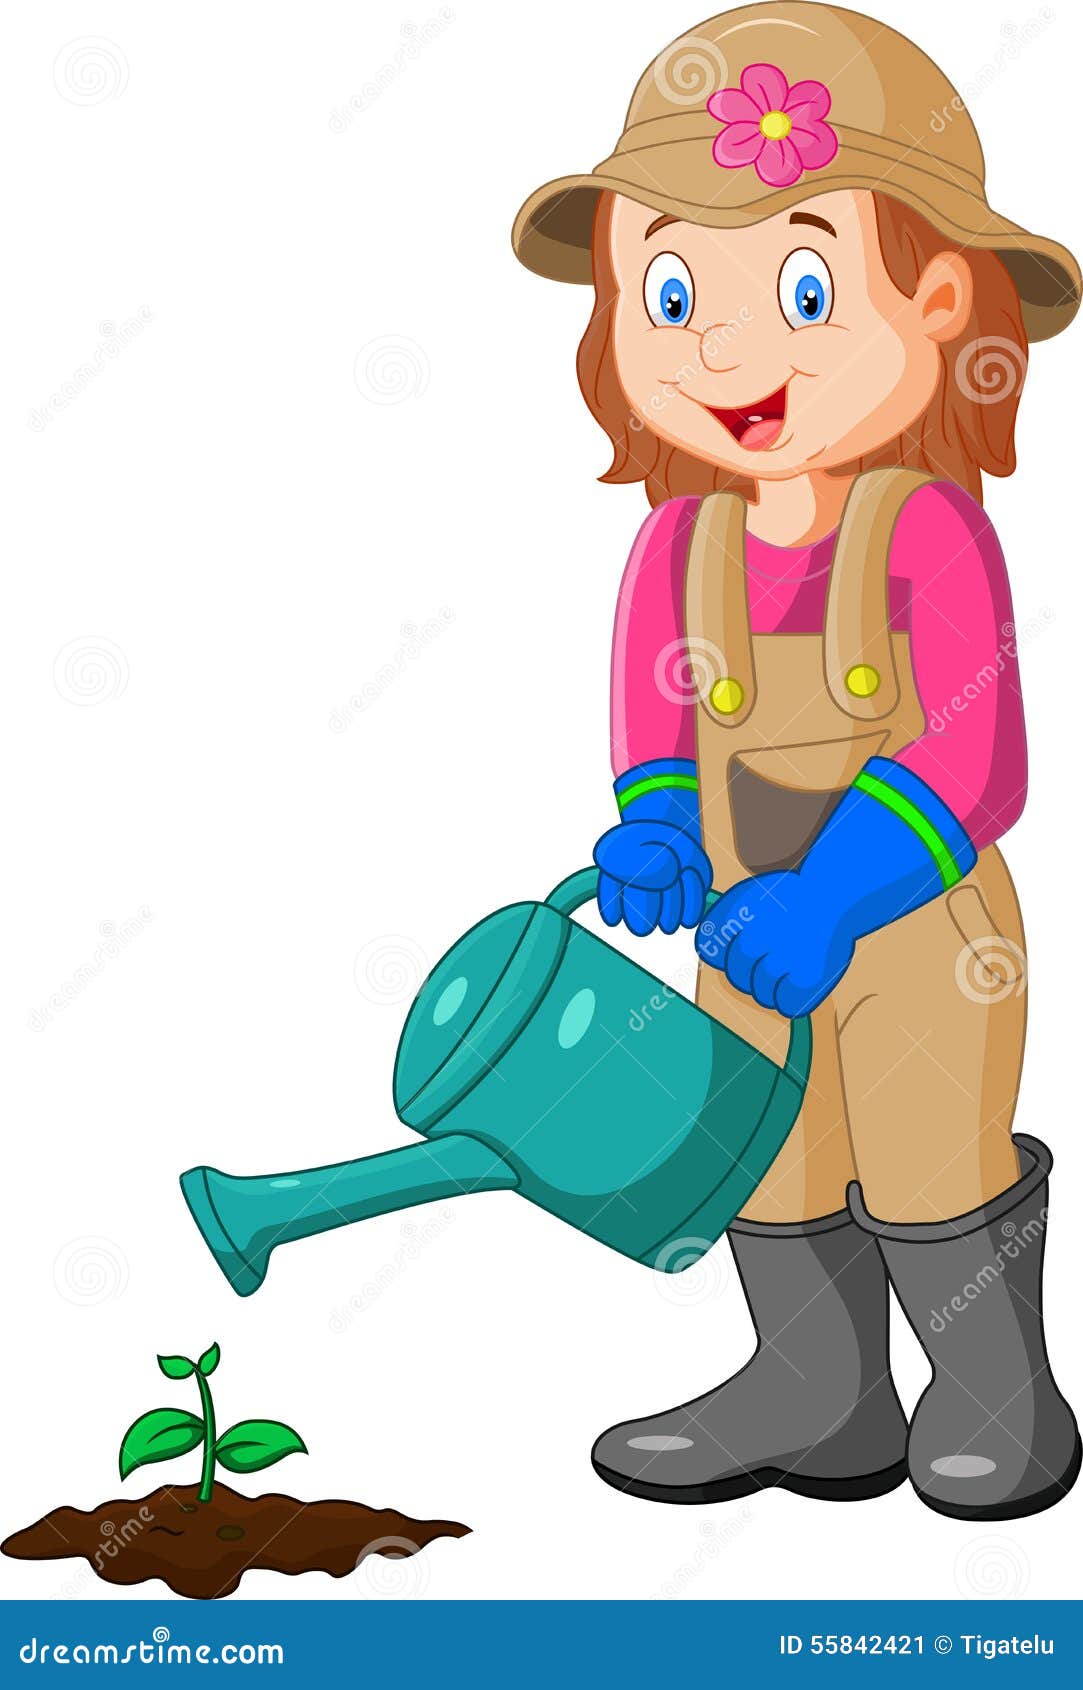 Cartoon she is Watering the Plant Stock Vector - Illustration of smile